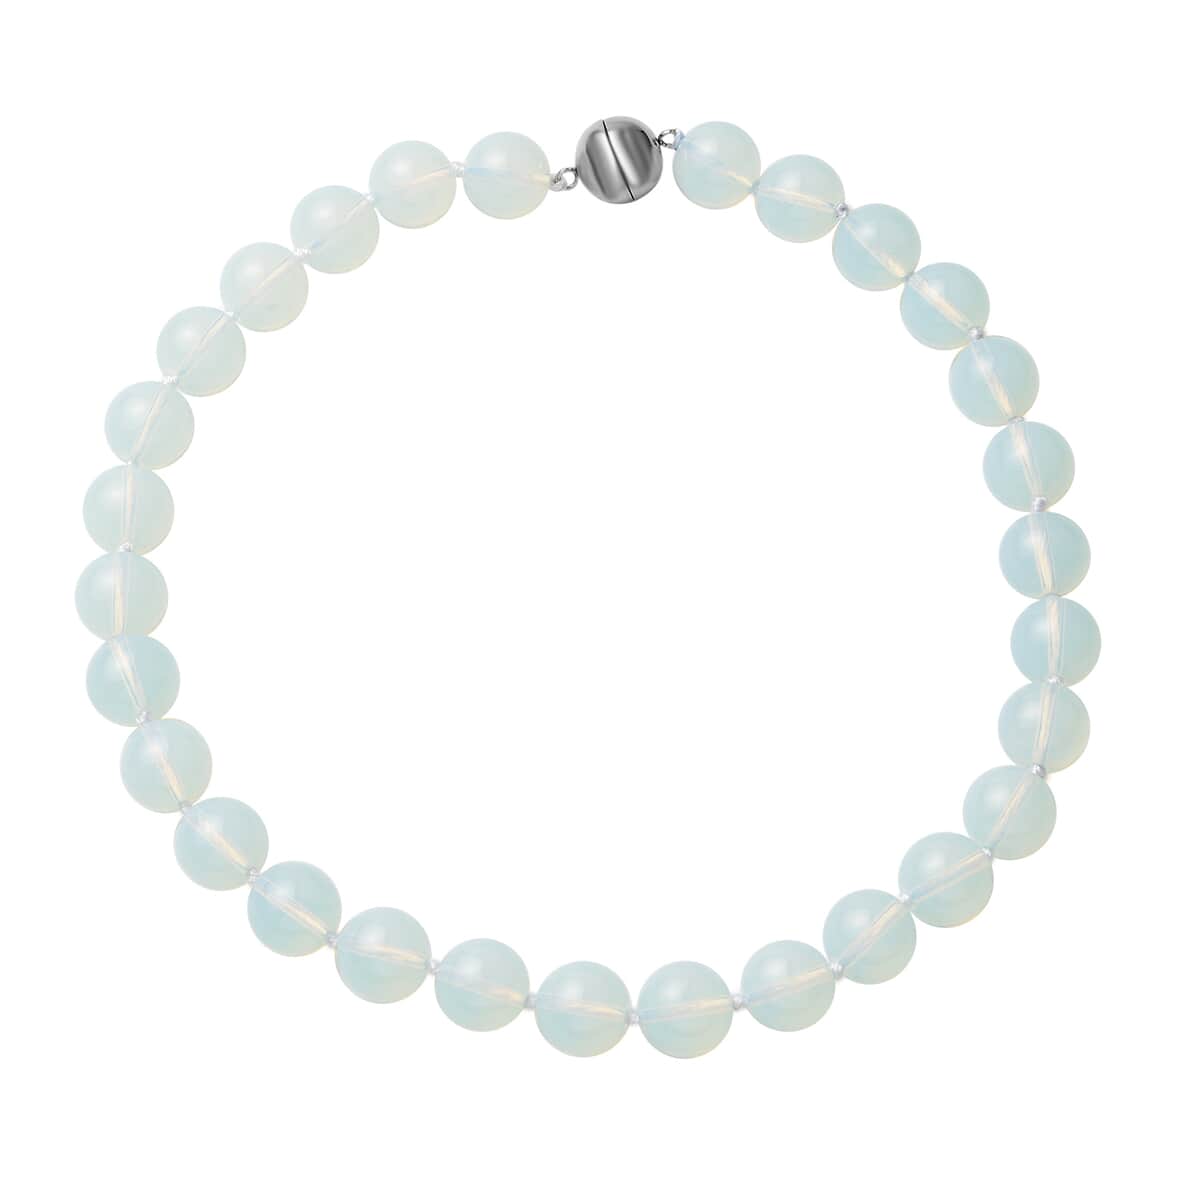 Buy Opalite 13-15mm Beaded Necklace 18 Inches in Silvertone 519.00 ctw ...